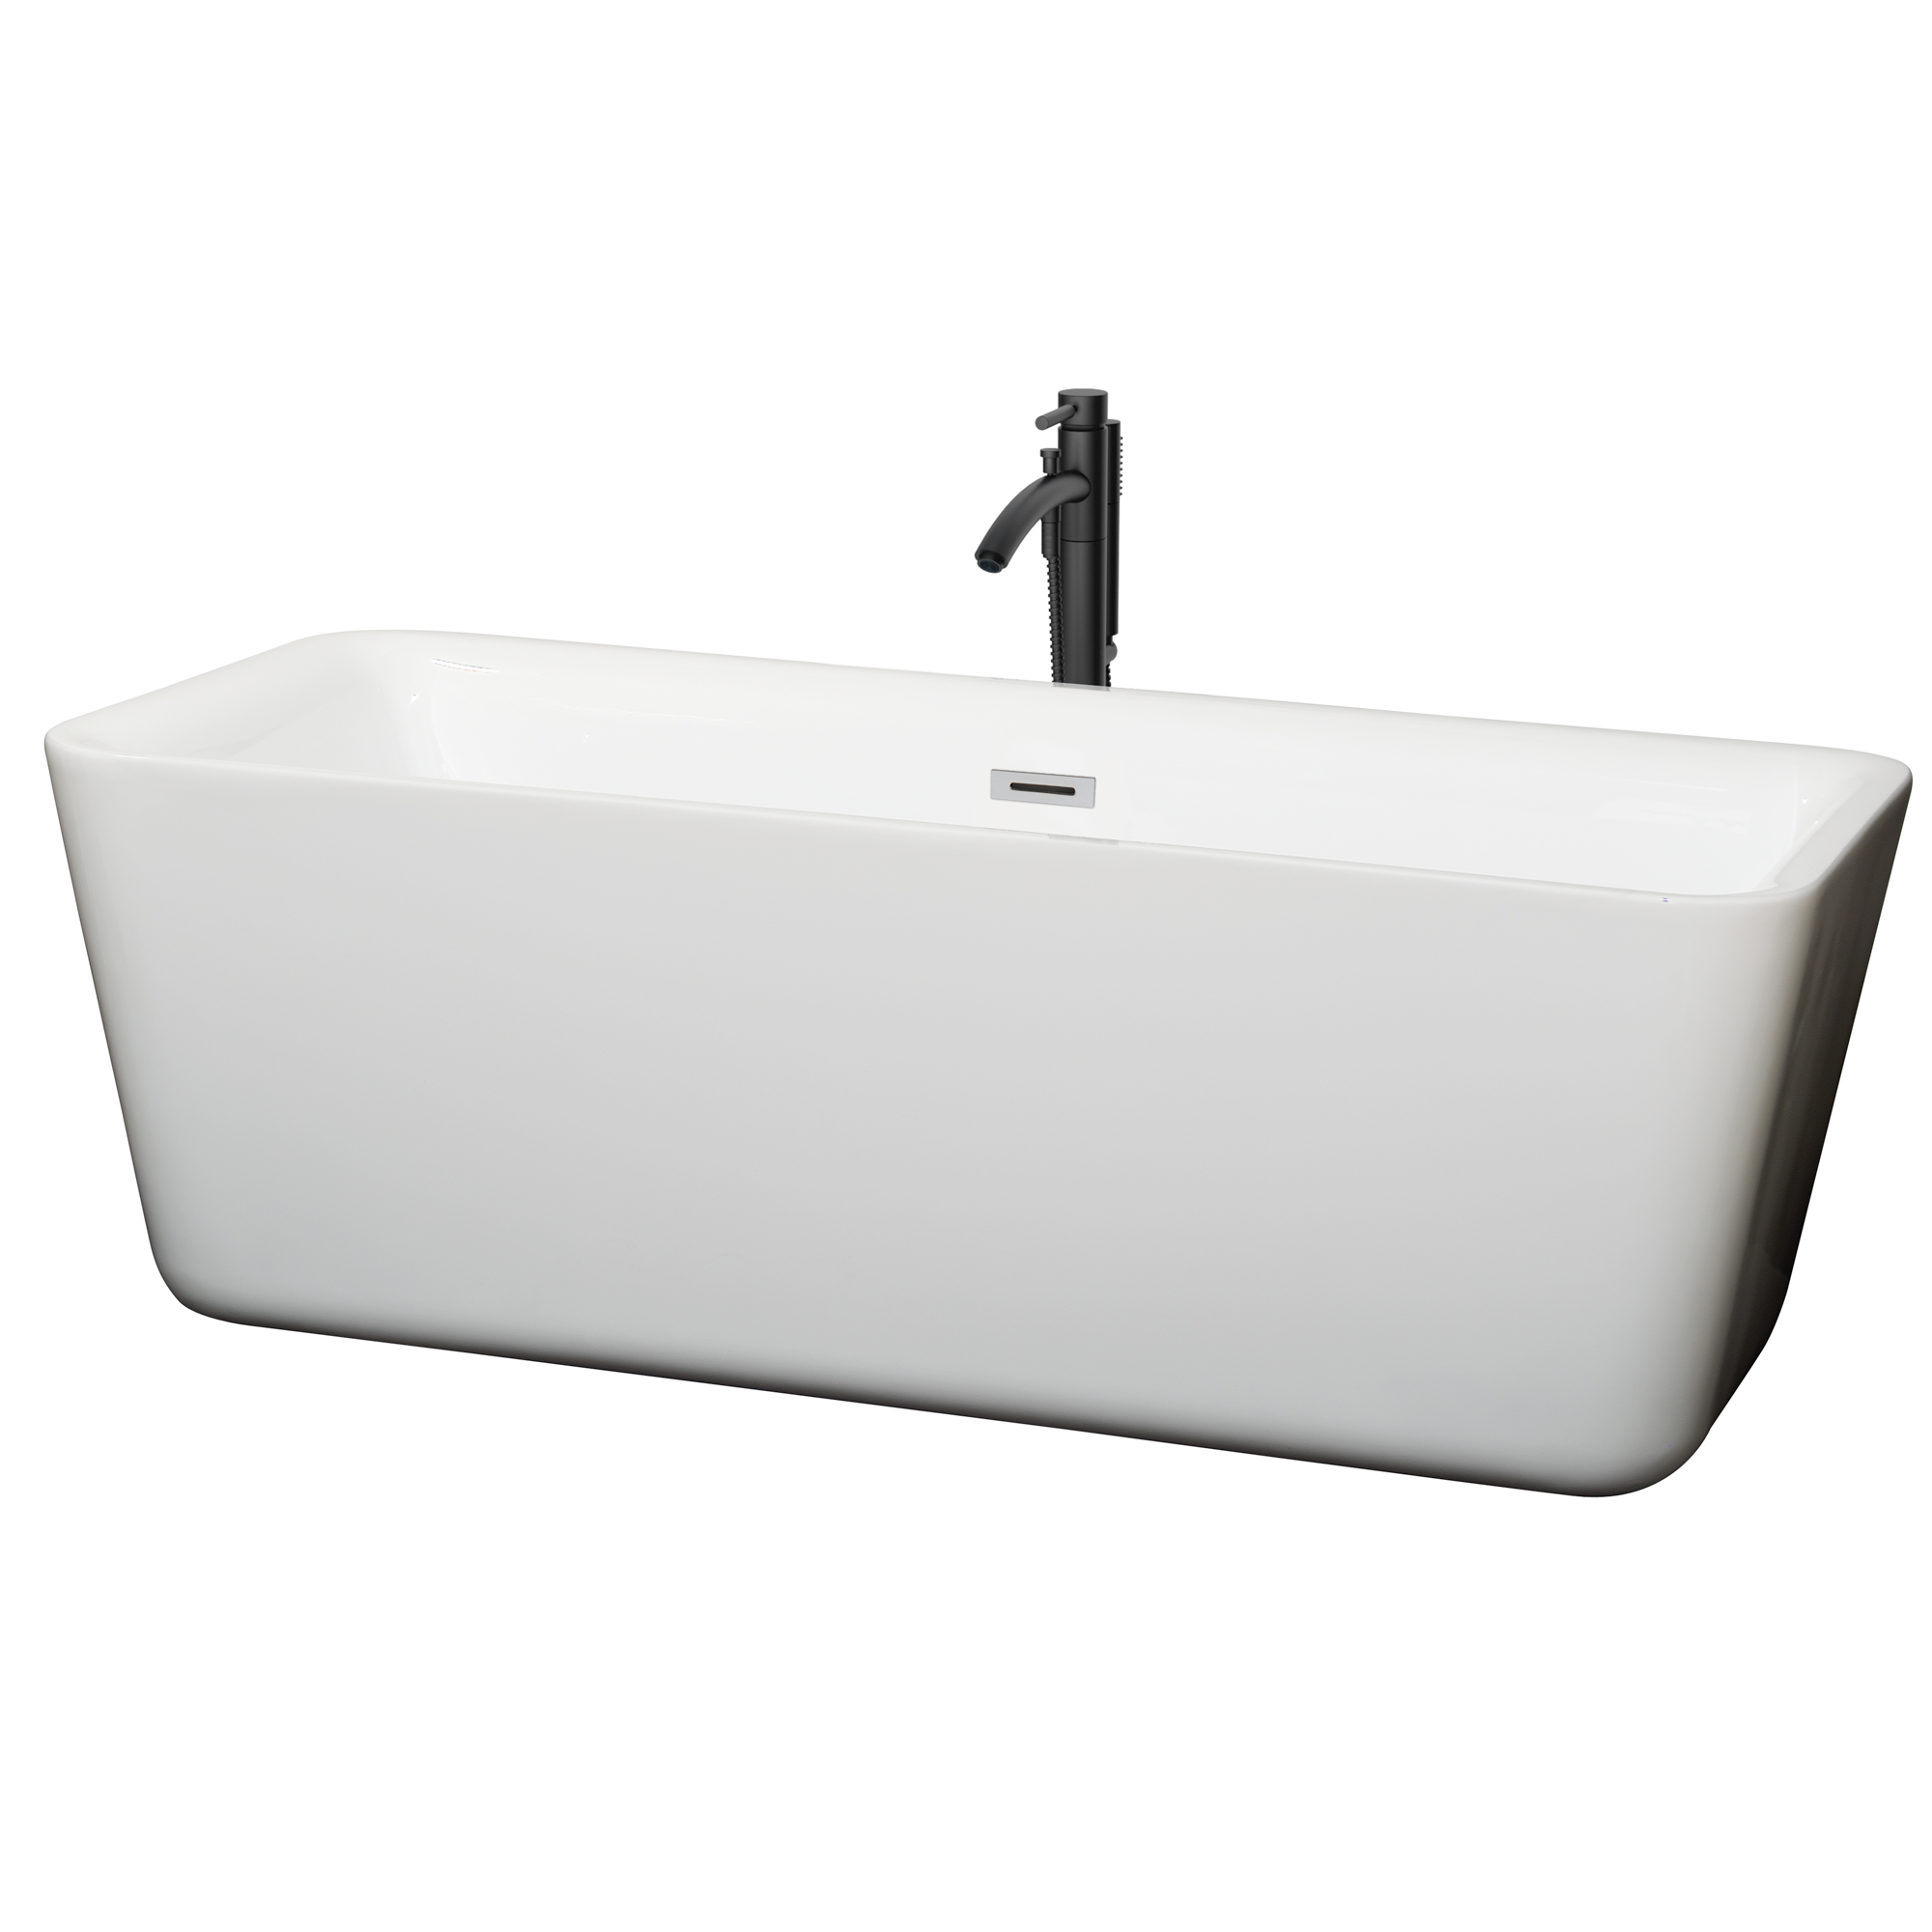 69" Freestanding Bathtub in White with Polished Chrome Trim and Floor Mounted Faucet in Matte Black